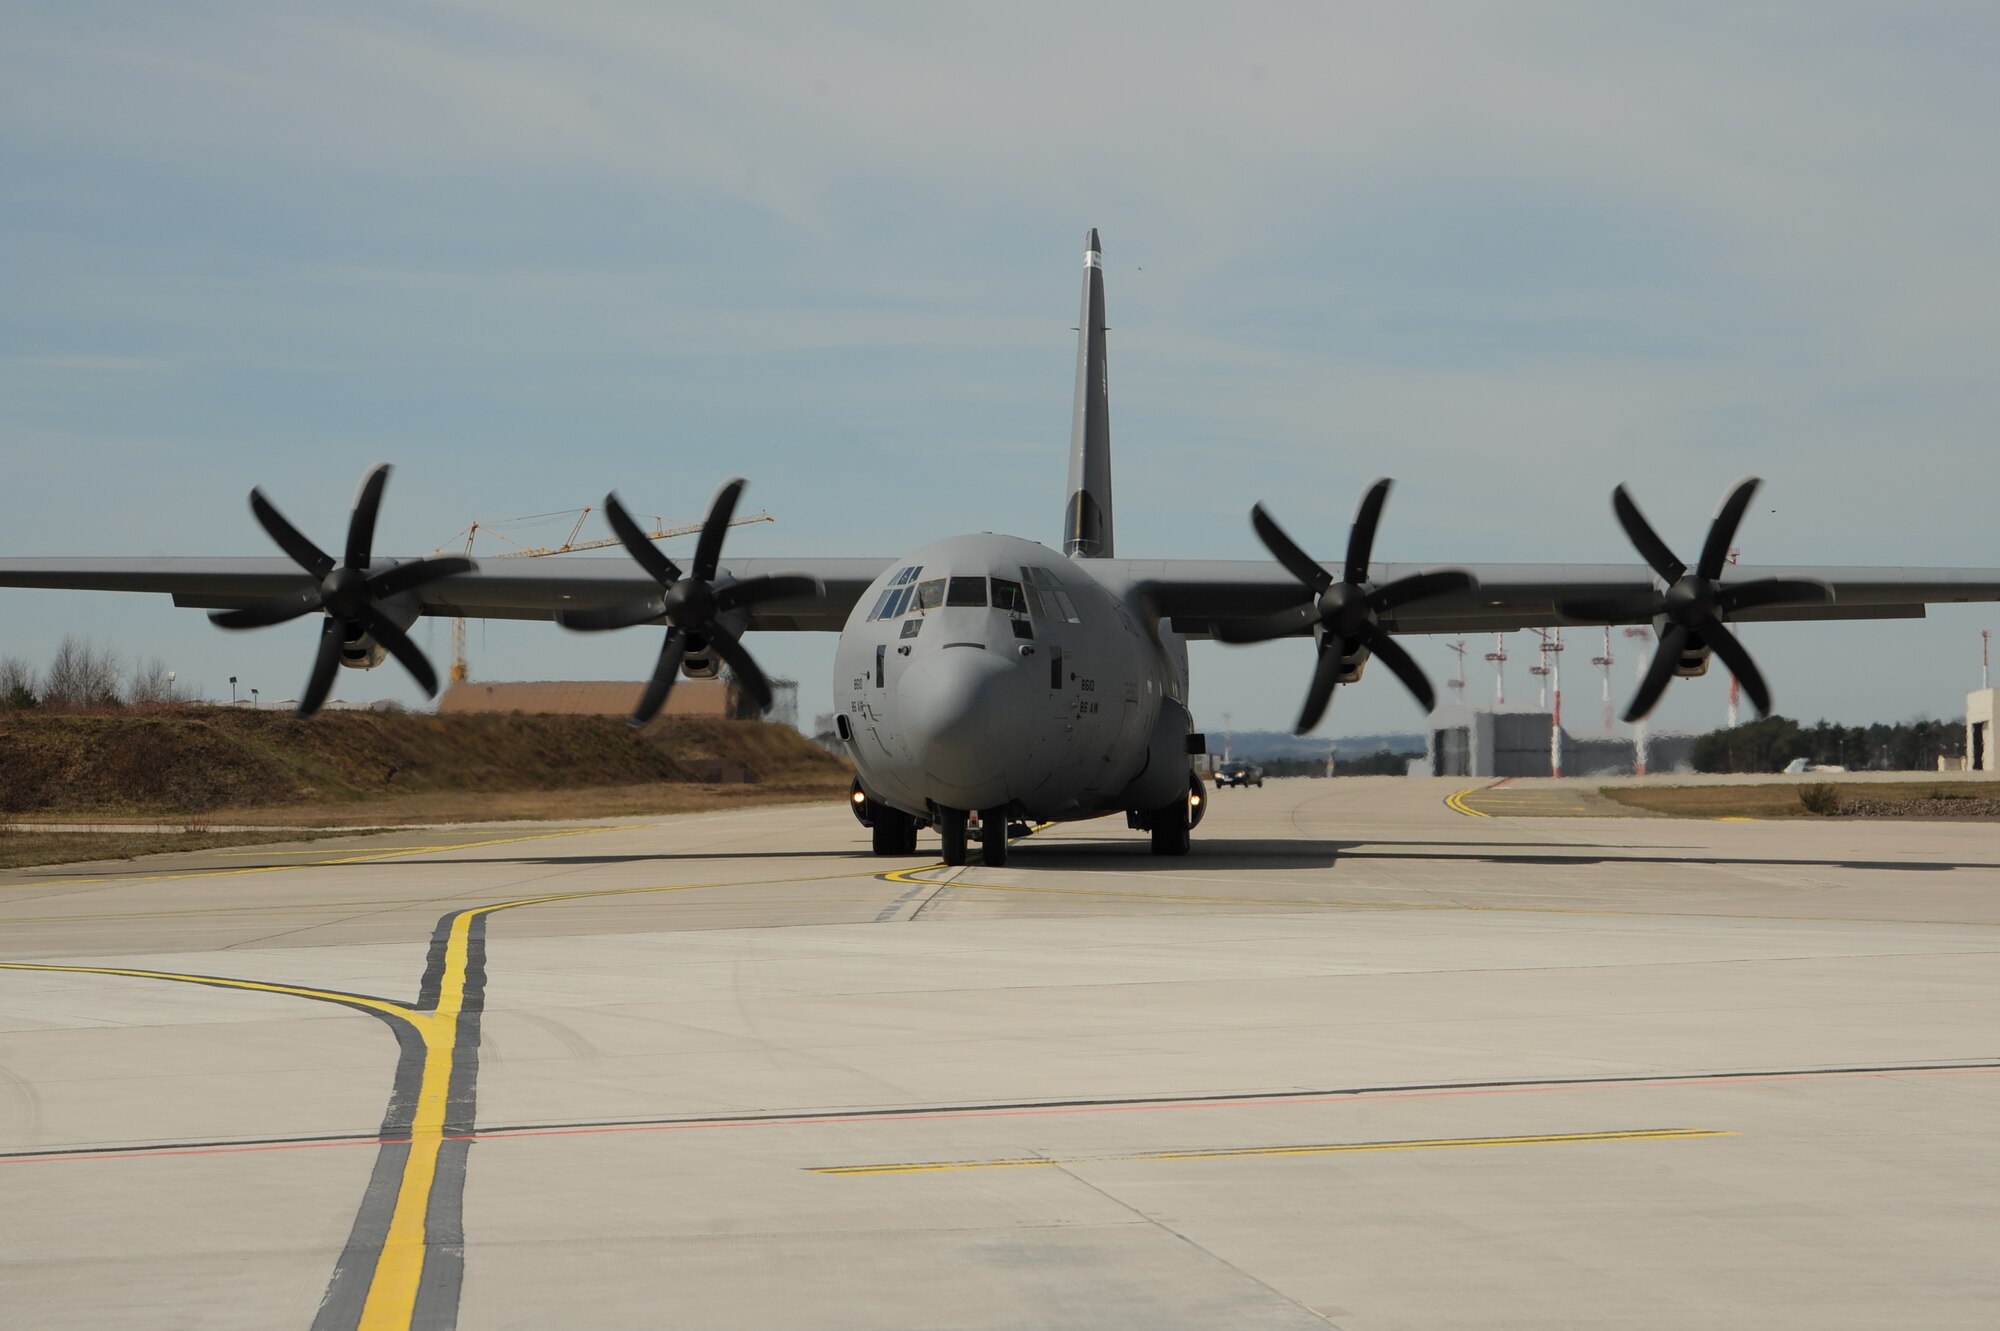 A C-130J Super Hercules taxis on the runway carrying Airmen to Romania to participate in Exercise Carpathian Spring, April 14, 2013, Ramstein Air Base, Germany. The exercise runs through April 21 and is designed for aircrews to train as well as help build a partnership capacity with Romanians. (U.S. Air Force photo/Airman 1st Class Hailey Haux)